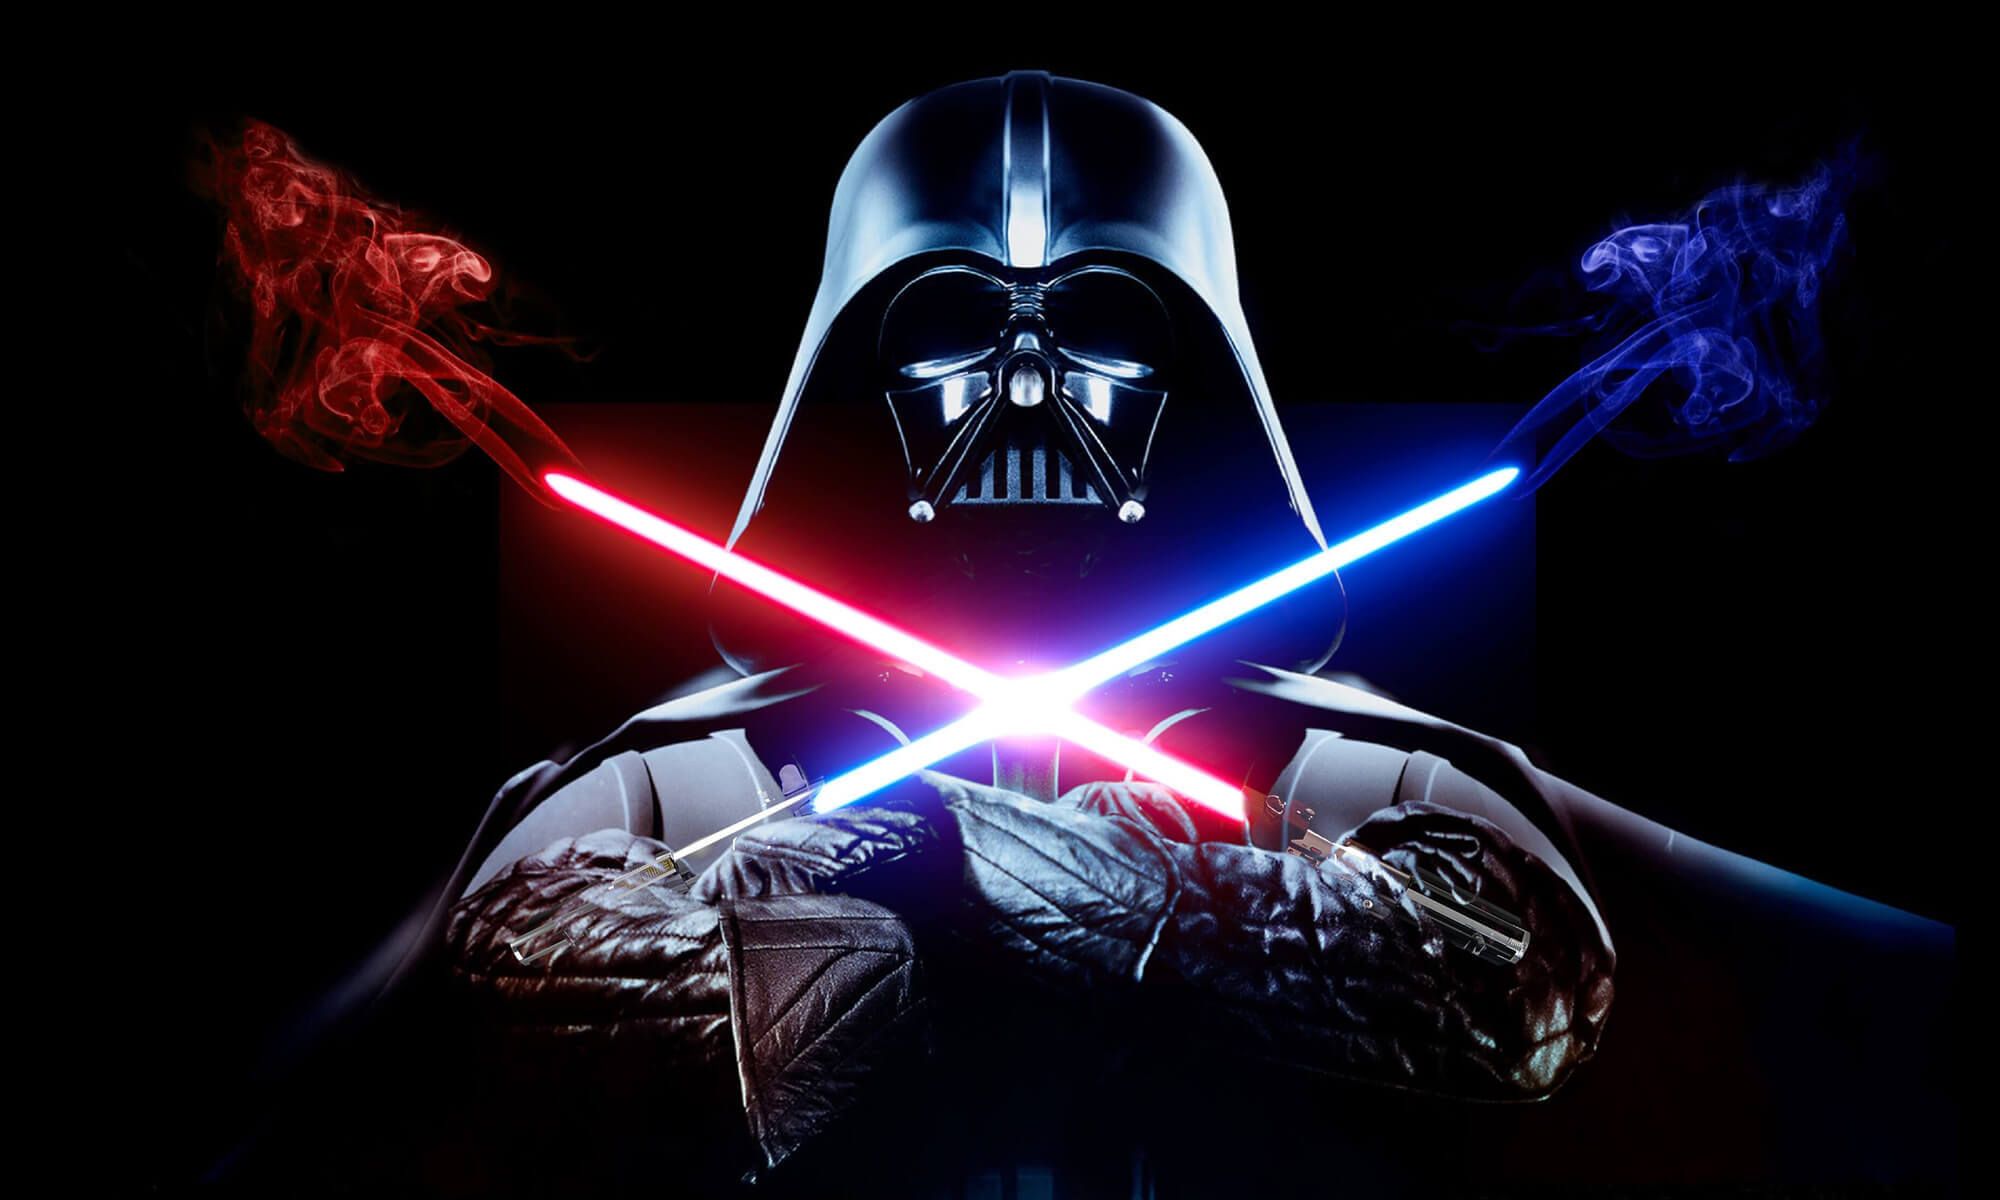 awesome wallpapers hd darth vader